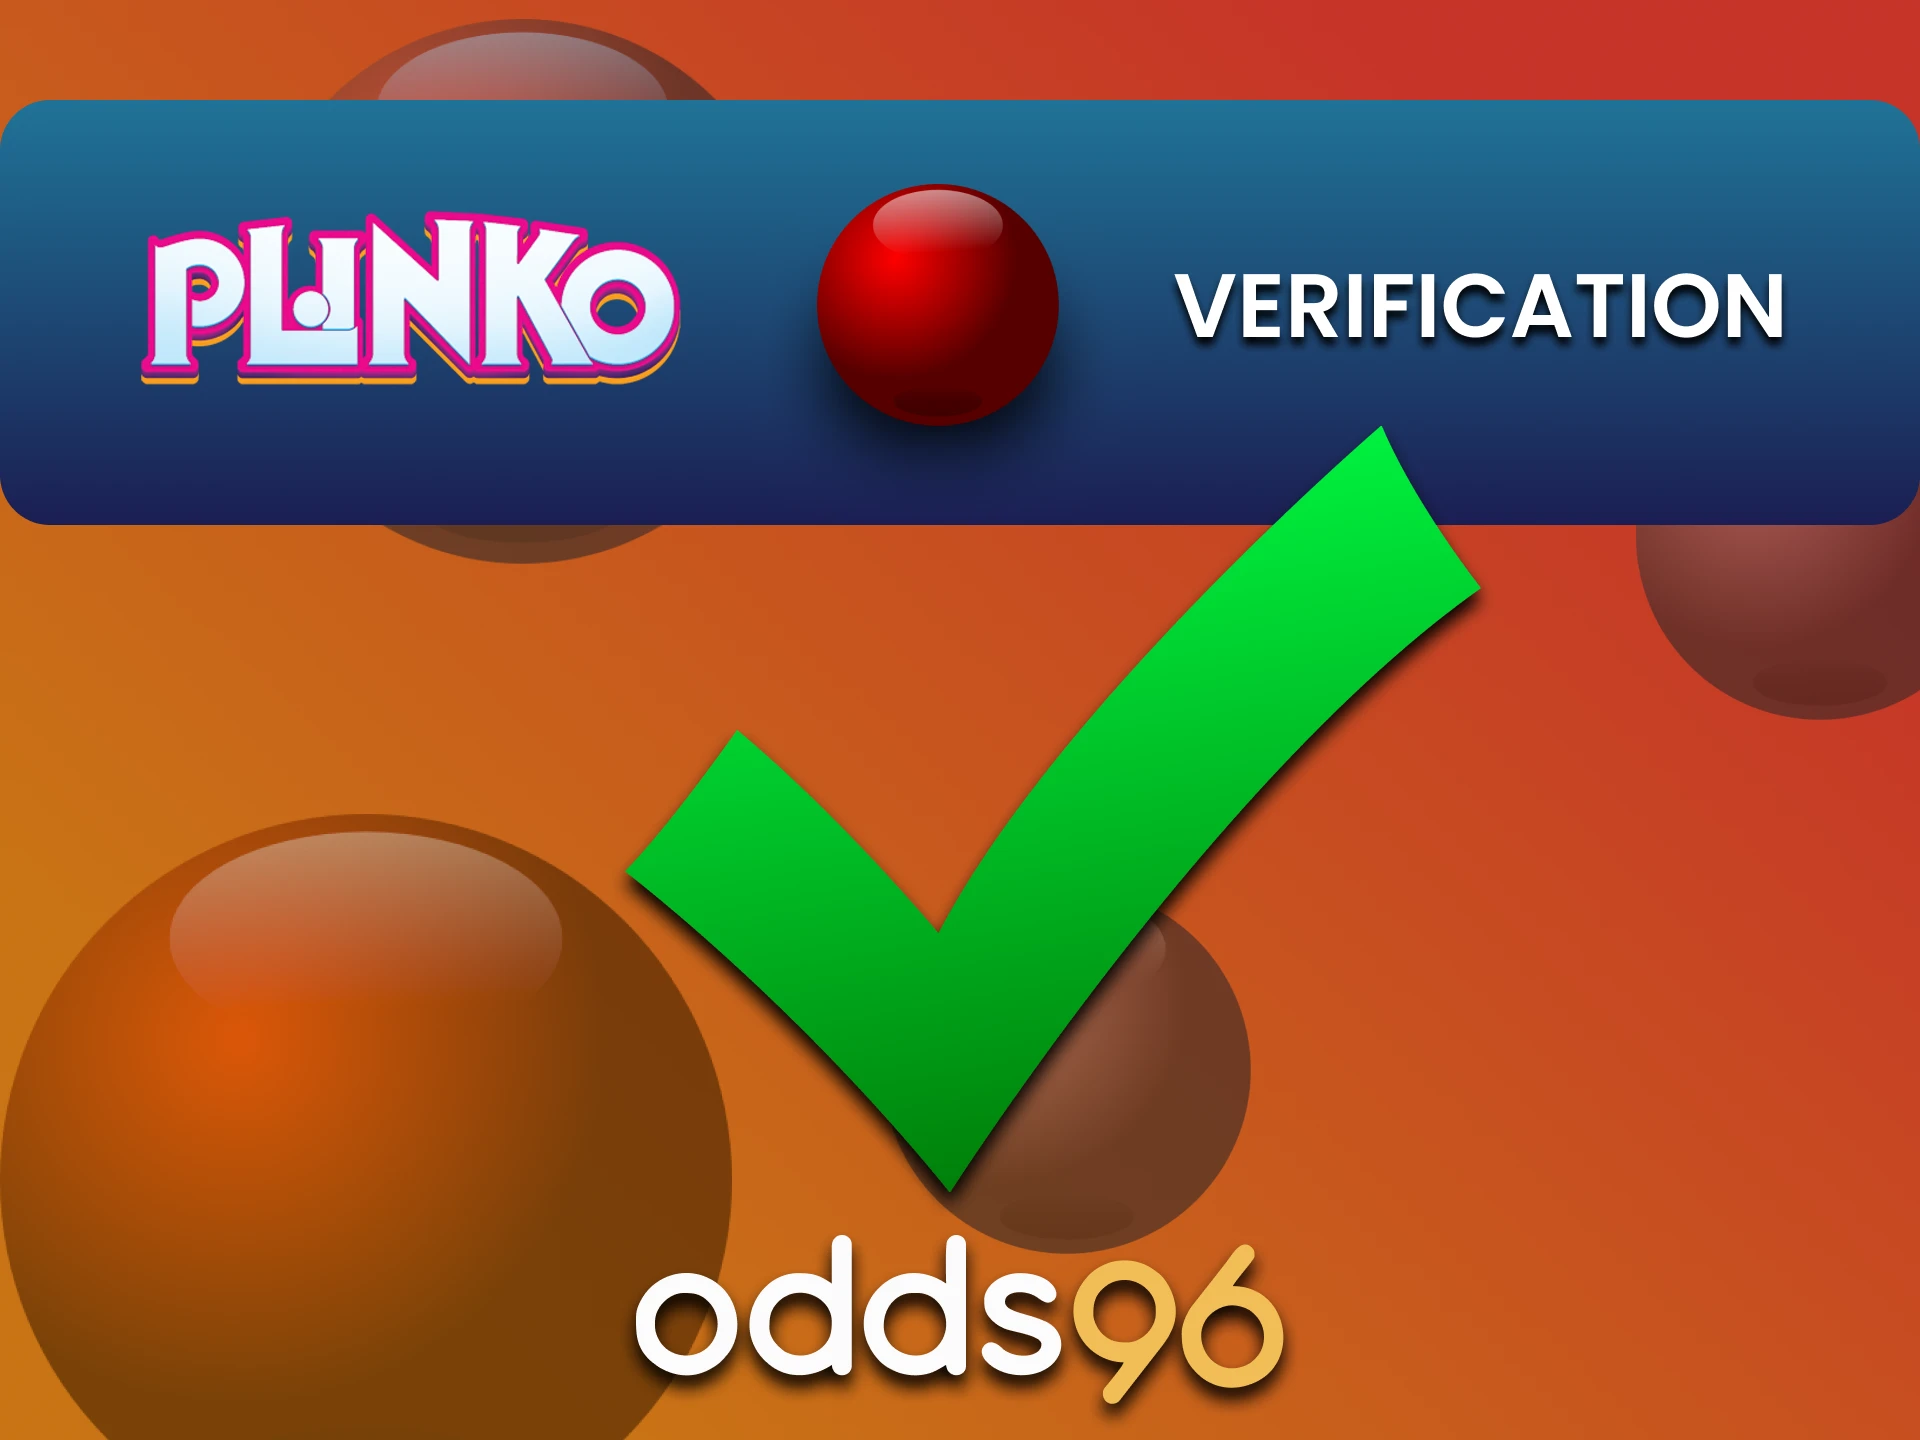 To play Plinko you need to fill in your data on odds96.